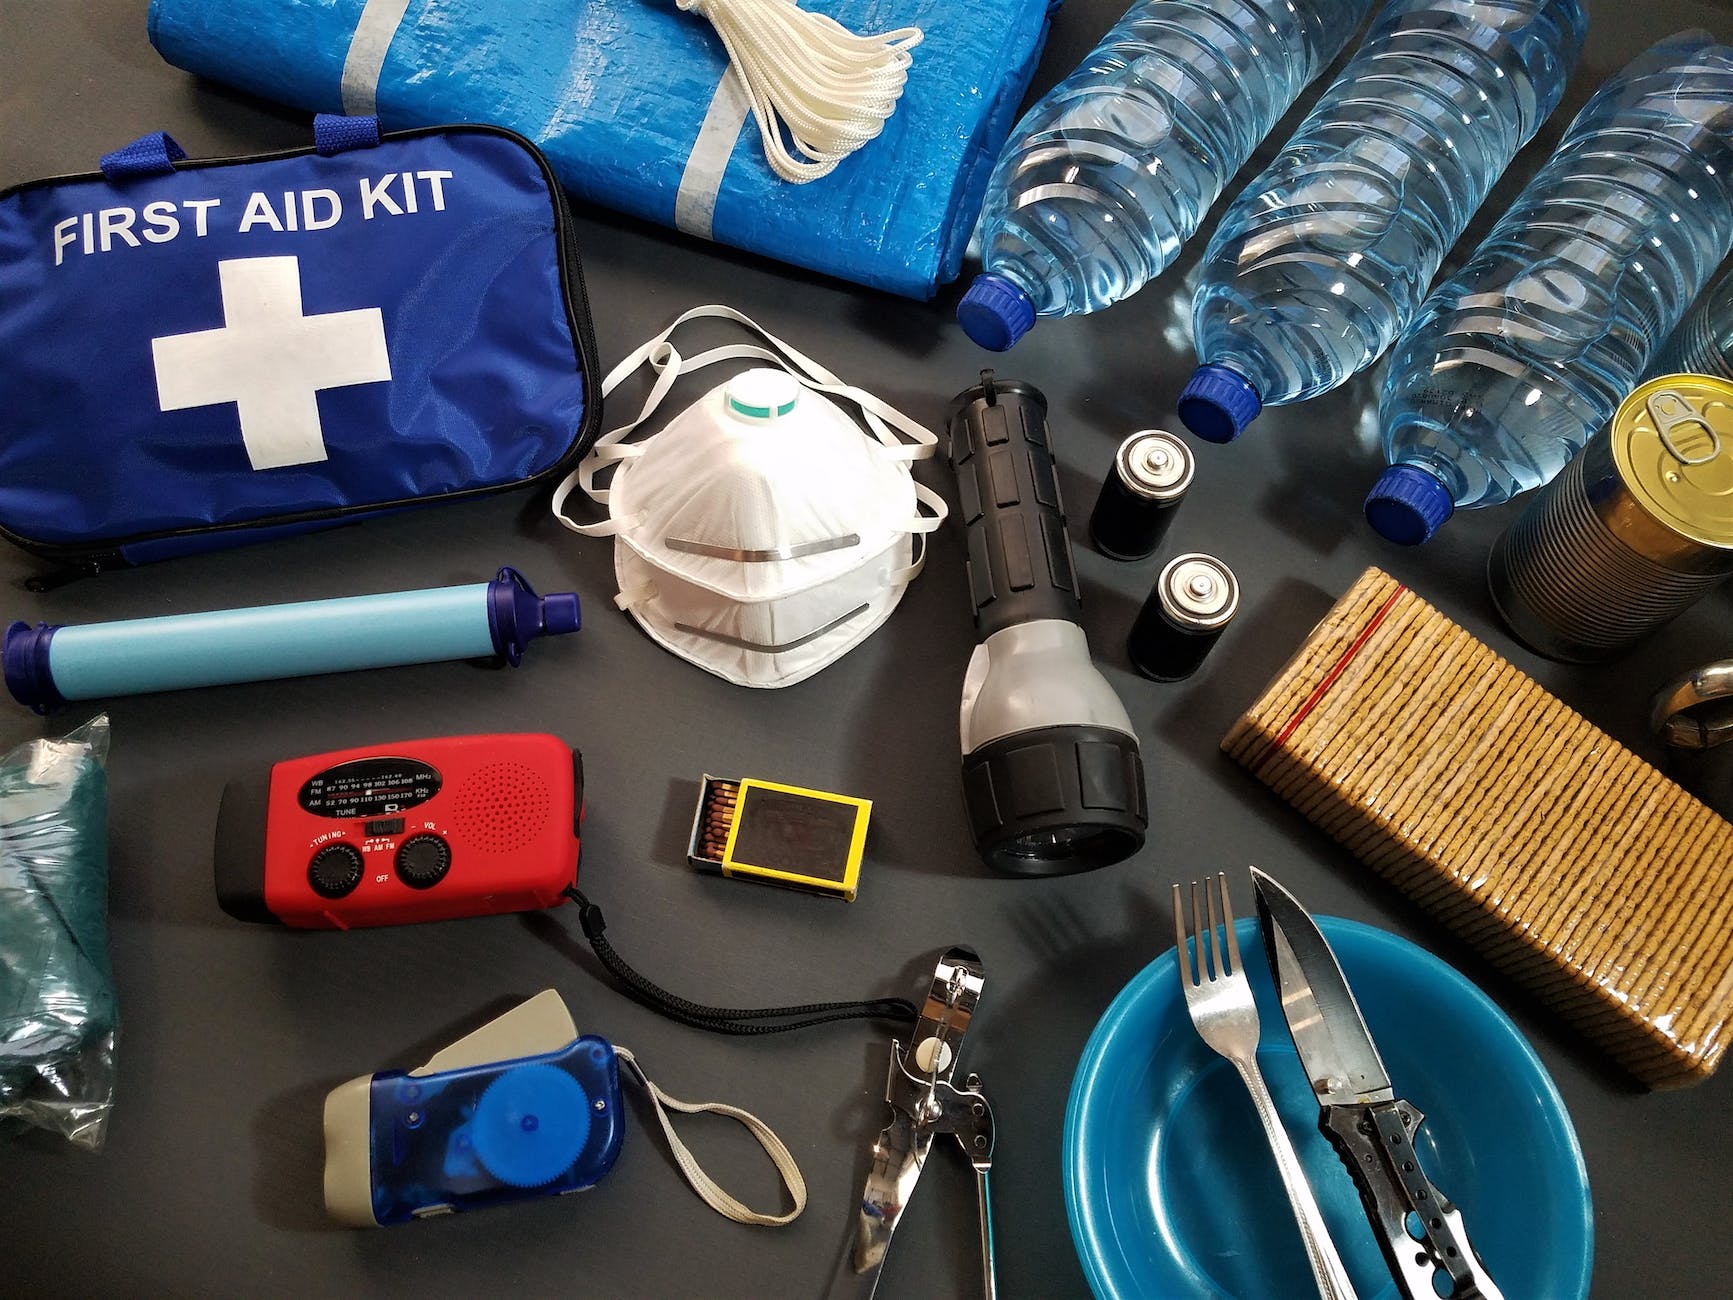 Emergency Medical Kit: First Aid